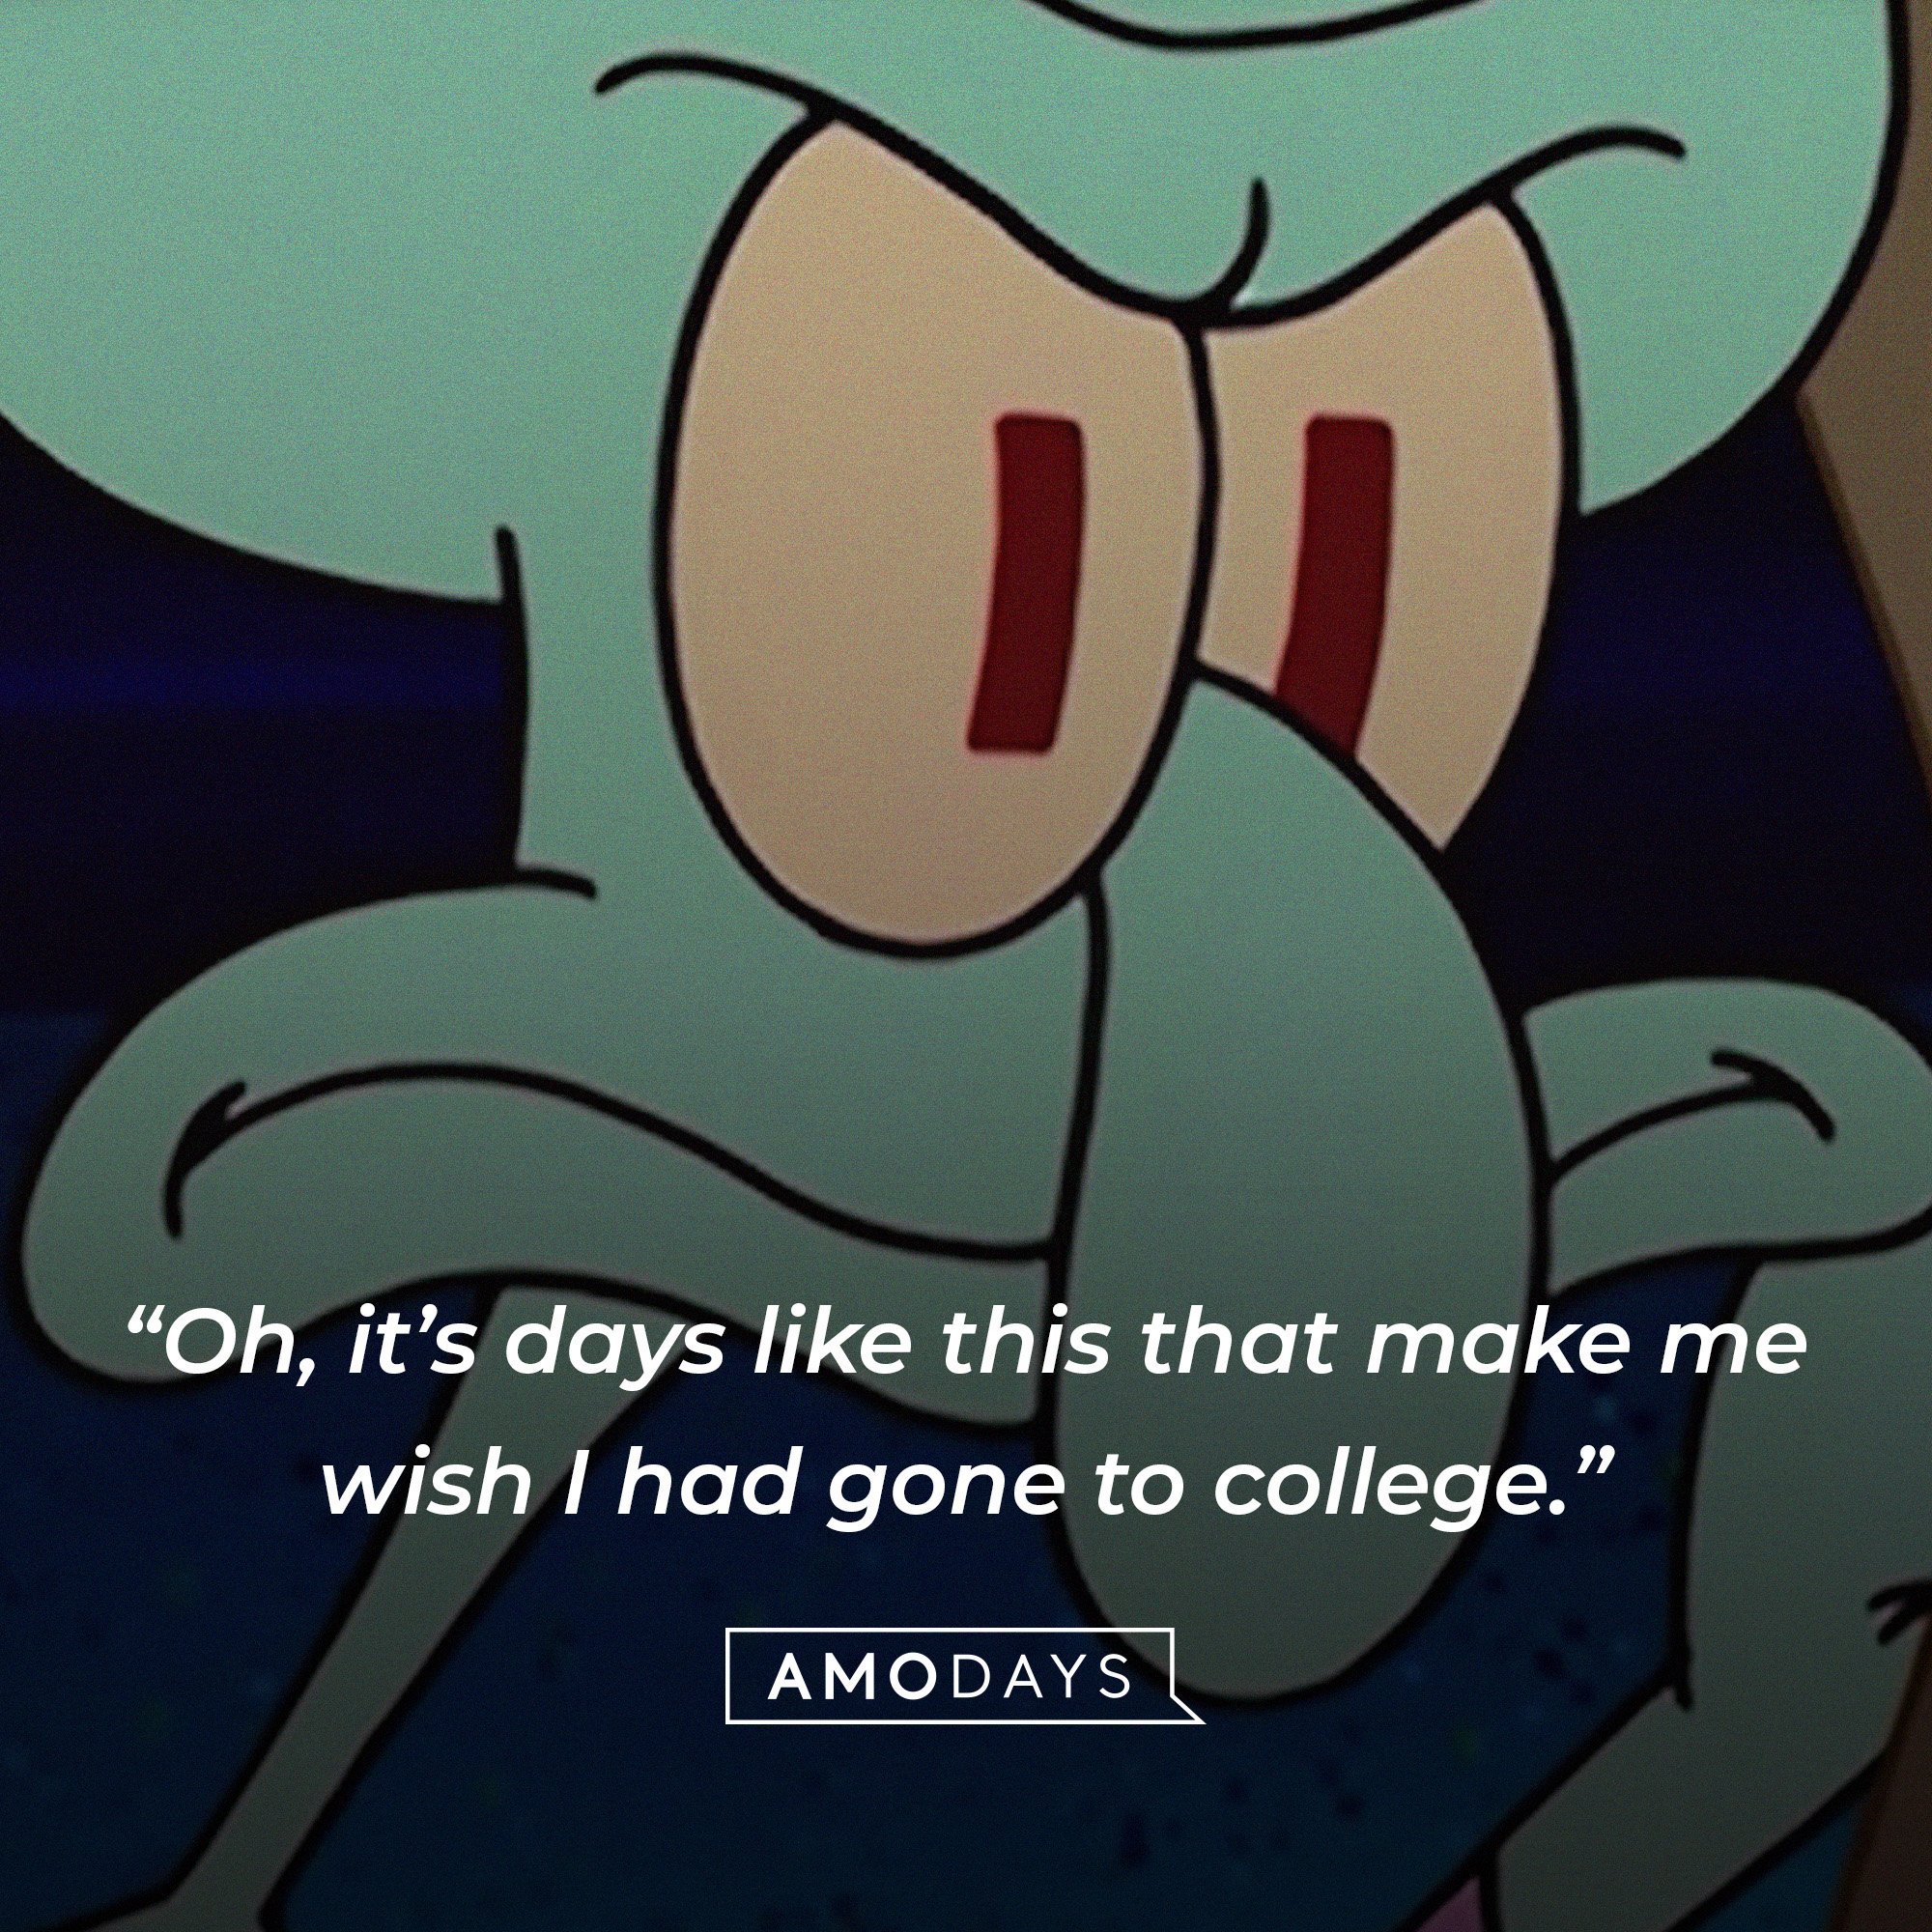 Squidward Tentacles’ quote: "Oh, it’s days like this that make me wish I had gone to college." | Source: AmoDays